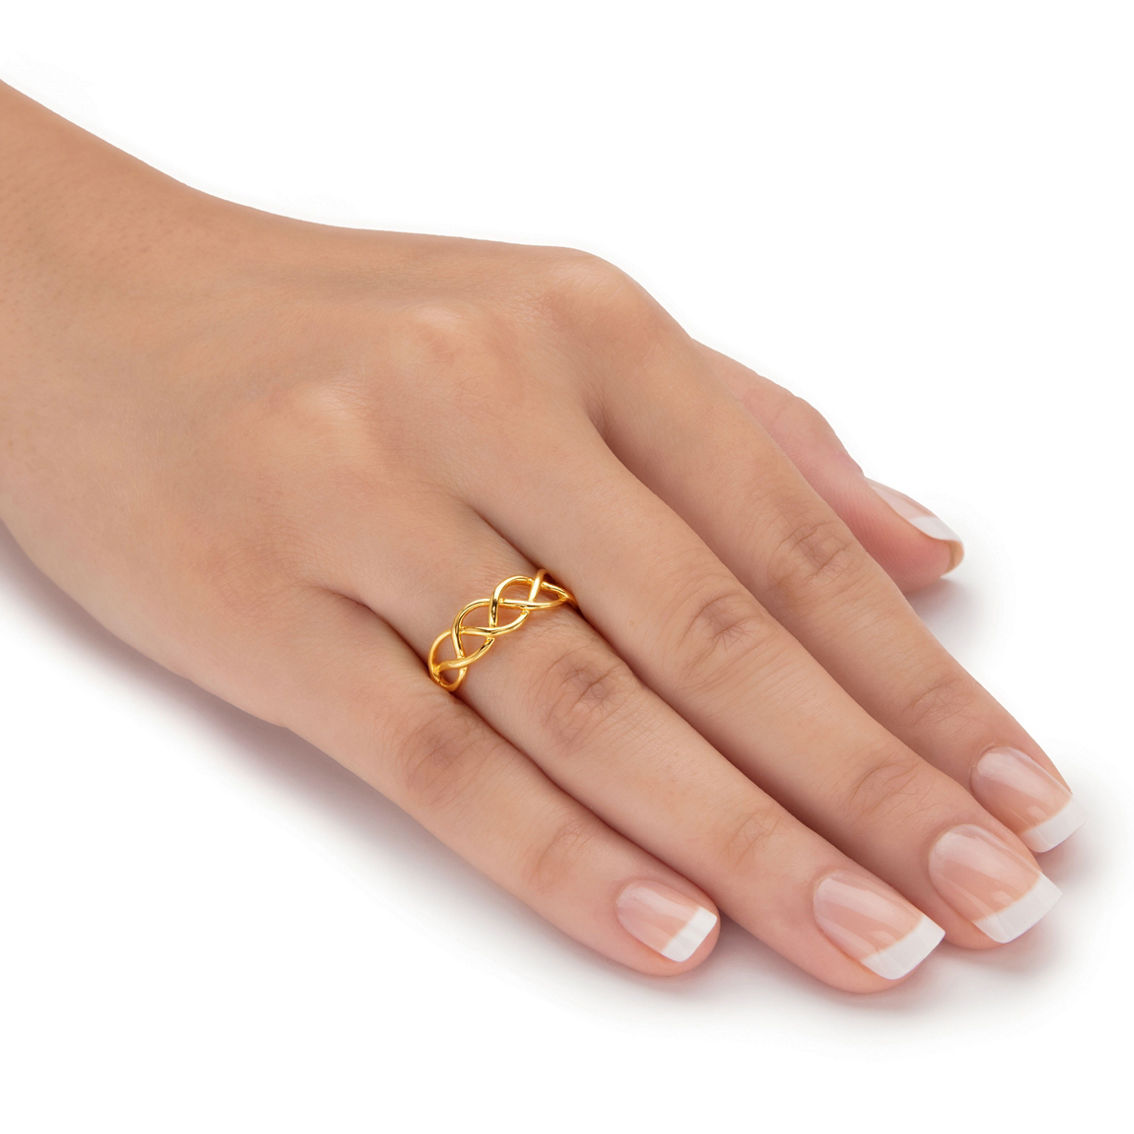 Solid 10k Yellow Gold Braided Twist Ring - Image 3 of 5